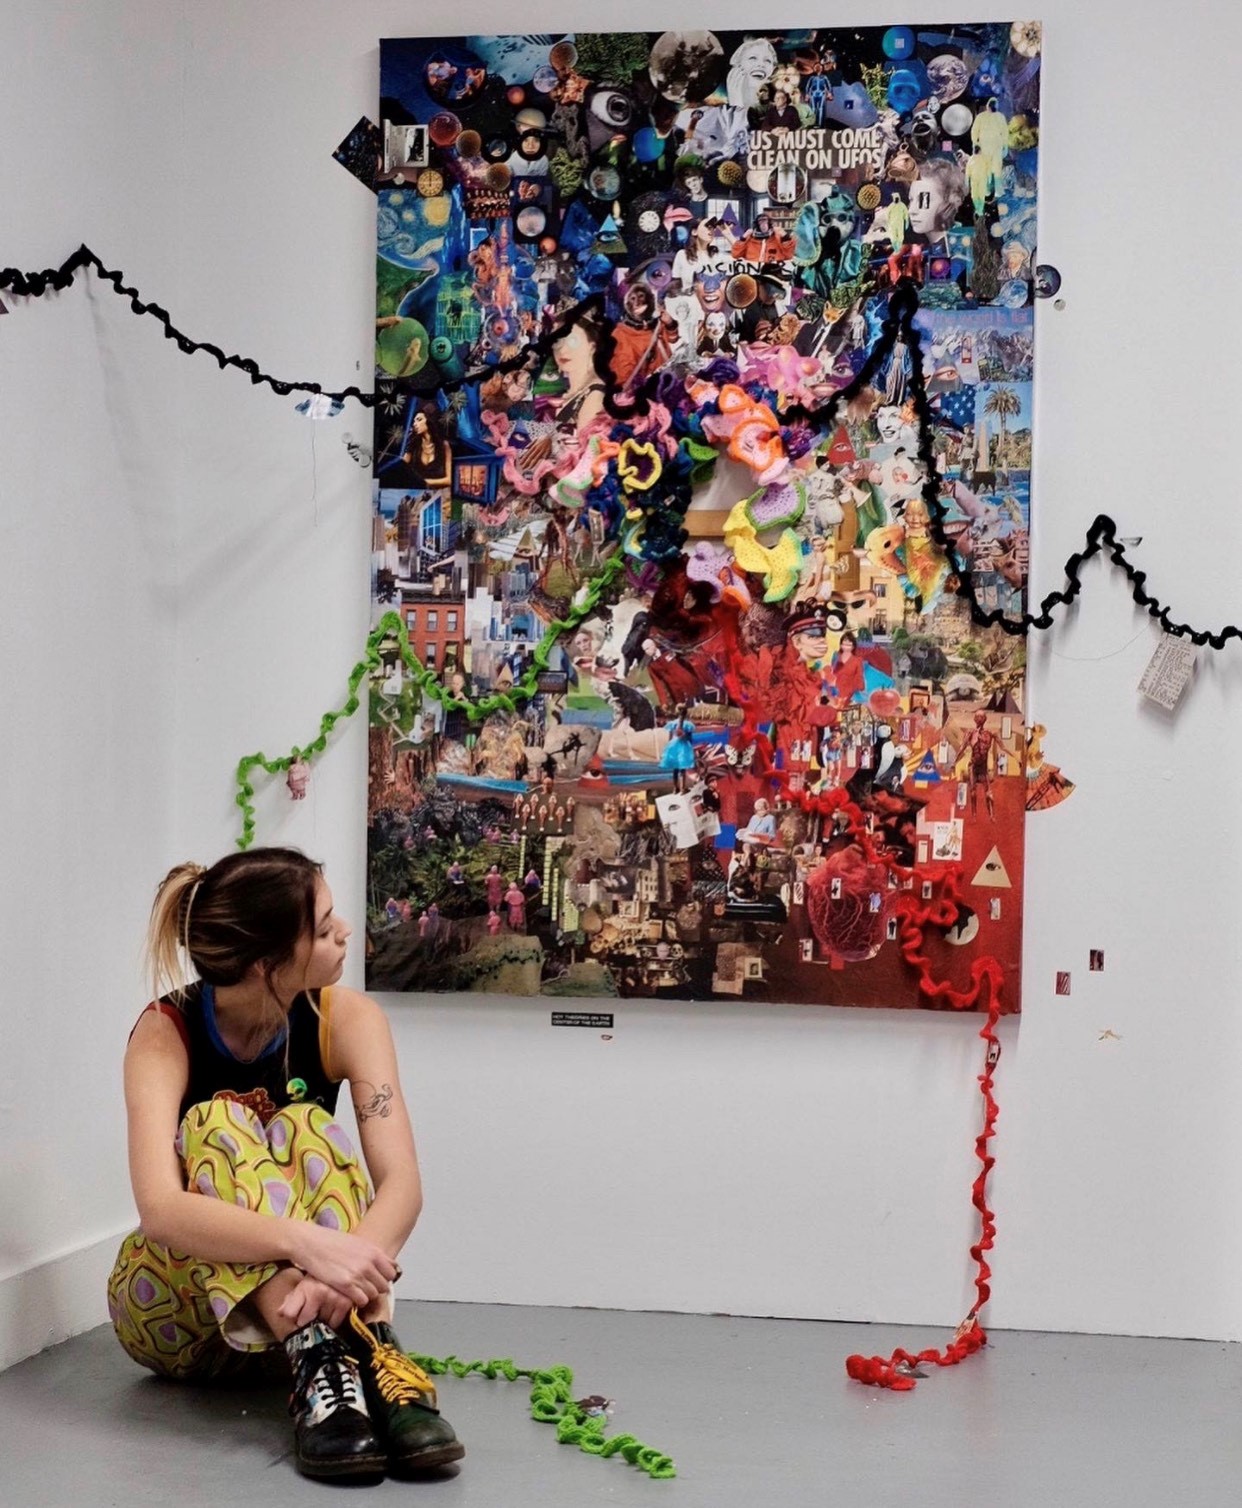 a young white woman sits in front of a chaotic blue, green, and red multimedia artwork